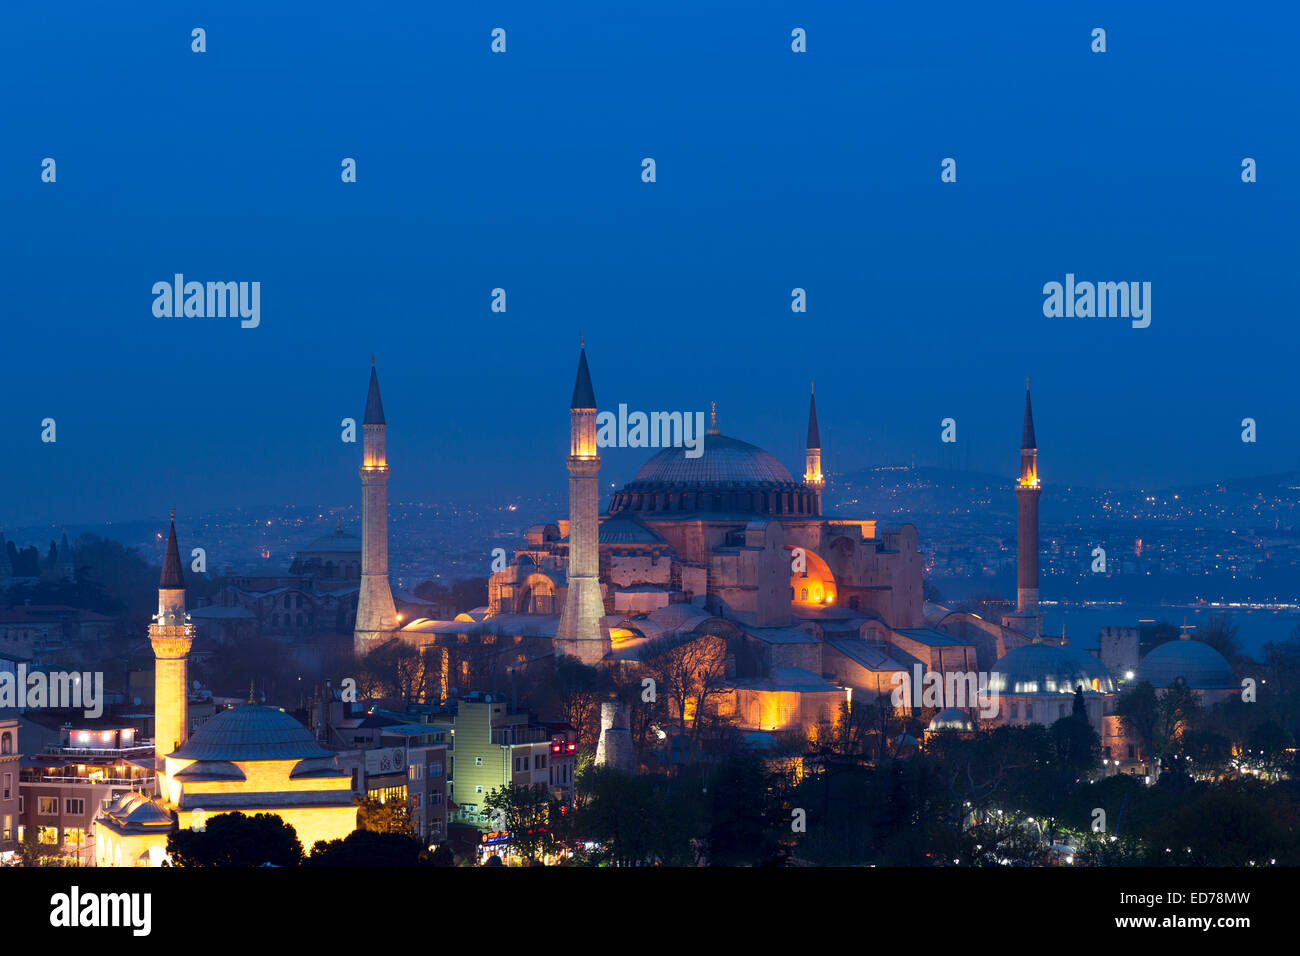 The Blue Mosque, Sultanahmet Camii or Sultan Ahmed Mosque in Istanbul, Republic of Turkey Stock Photo